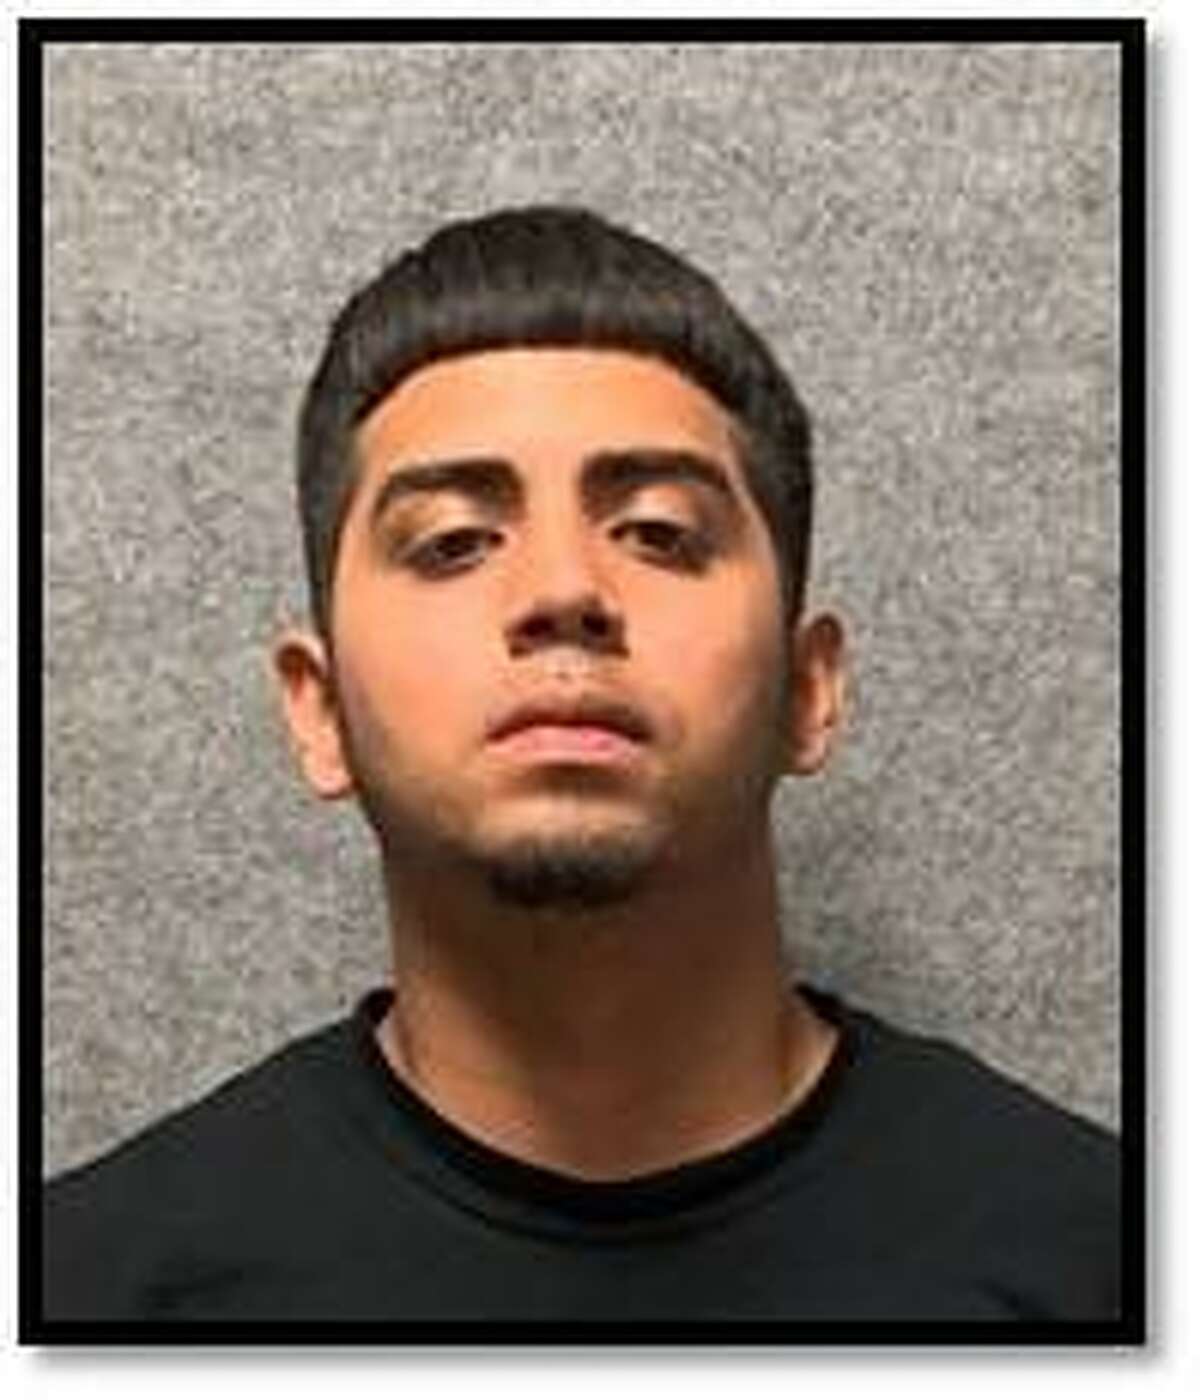 Nathan Sanchez was indicted on a charge of murder in connection with the fatal shooting of Takhai Michael outside the Blow Hookah Lounge on the Northeast Side.